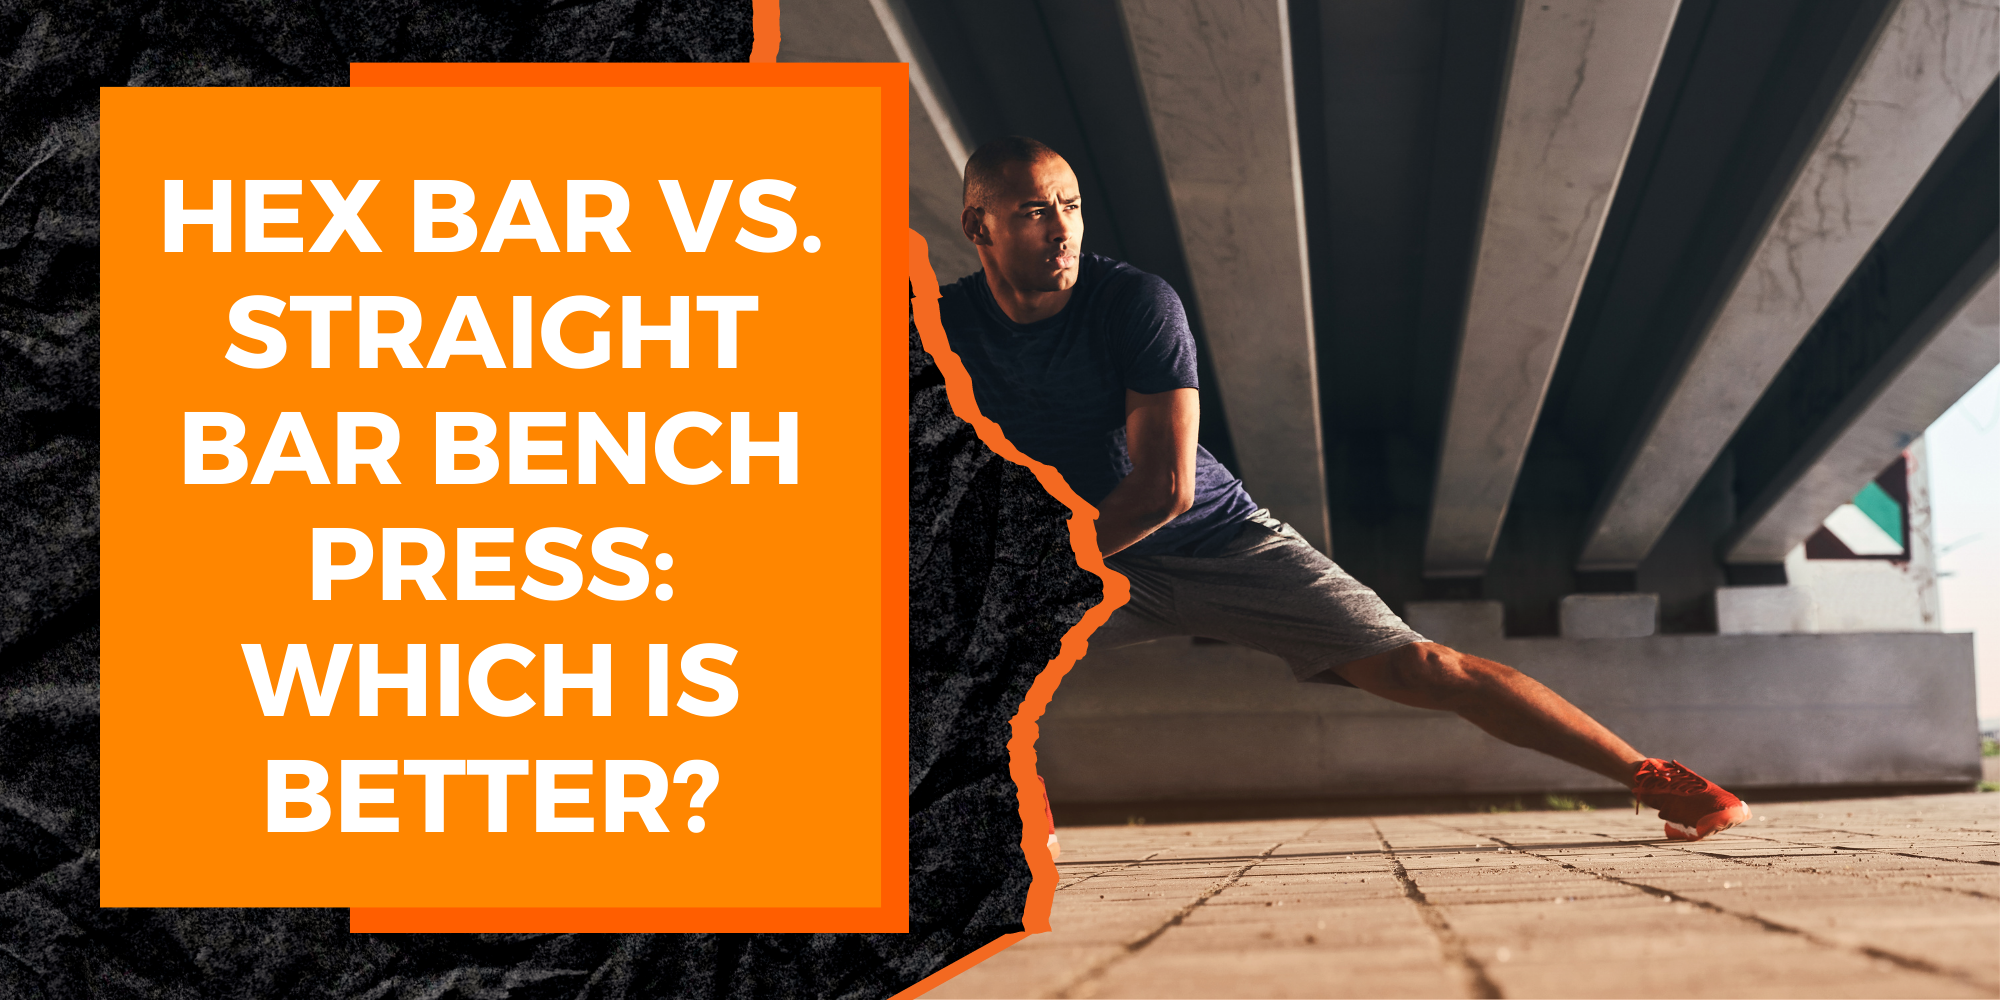 Hex Bar vs. Straight Bar Bench Press: Which is Better?